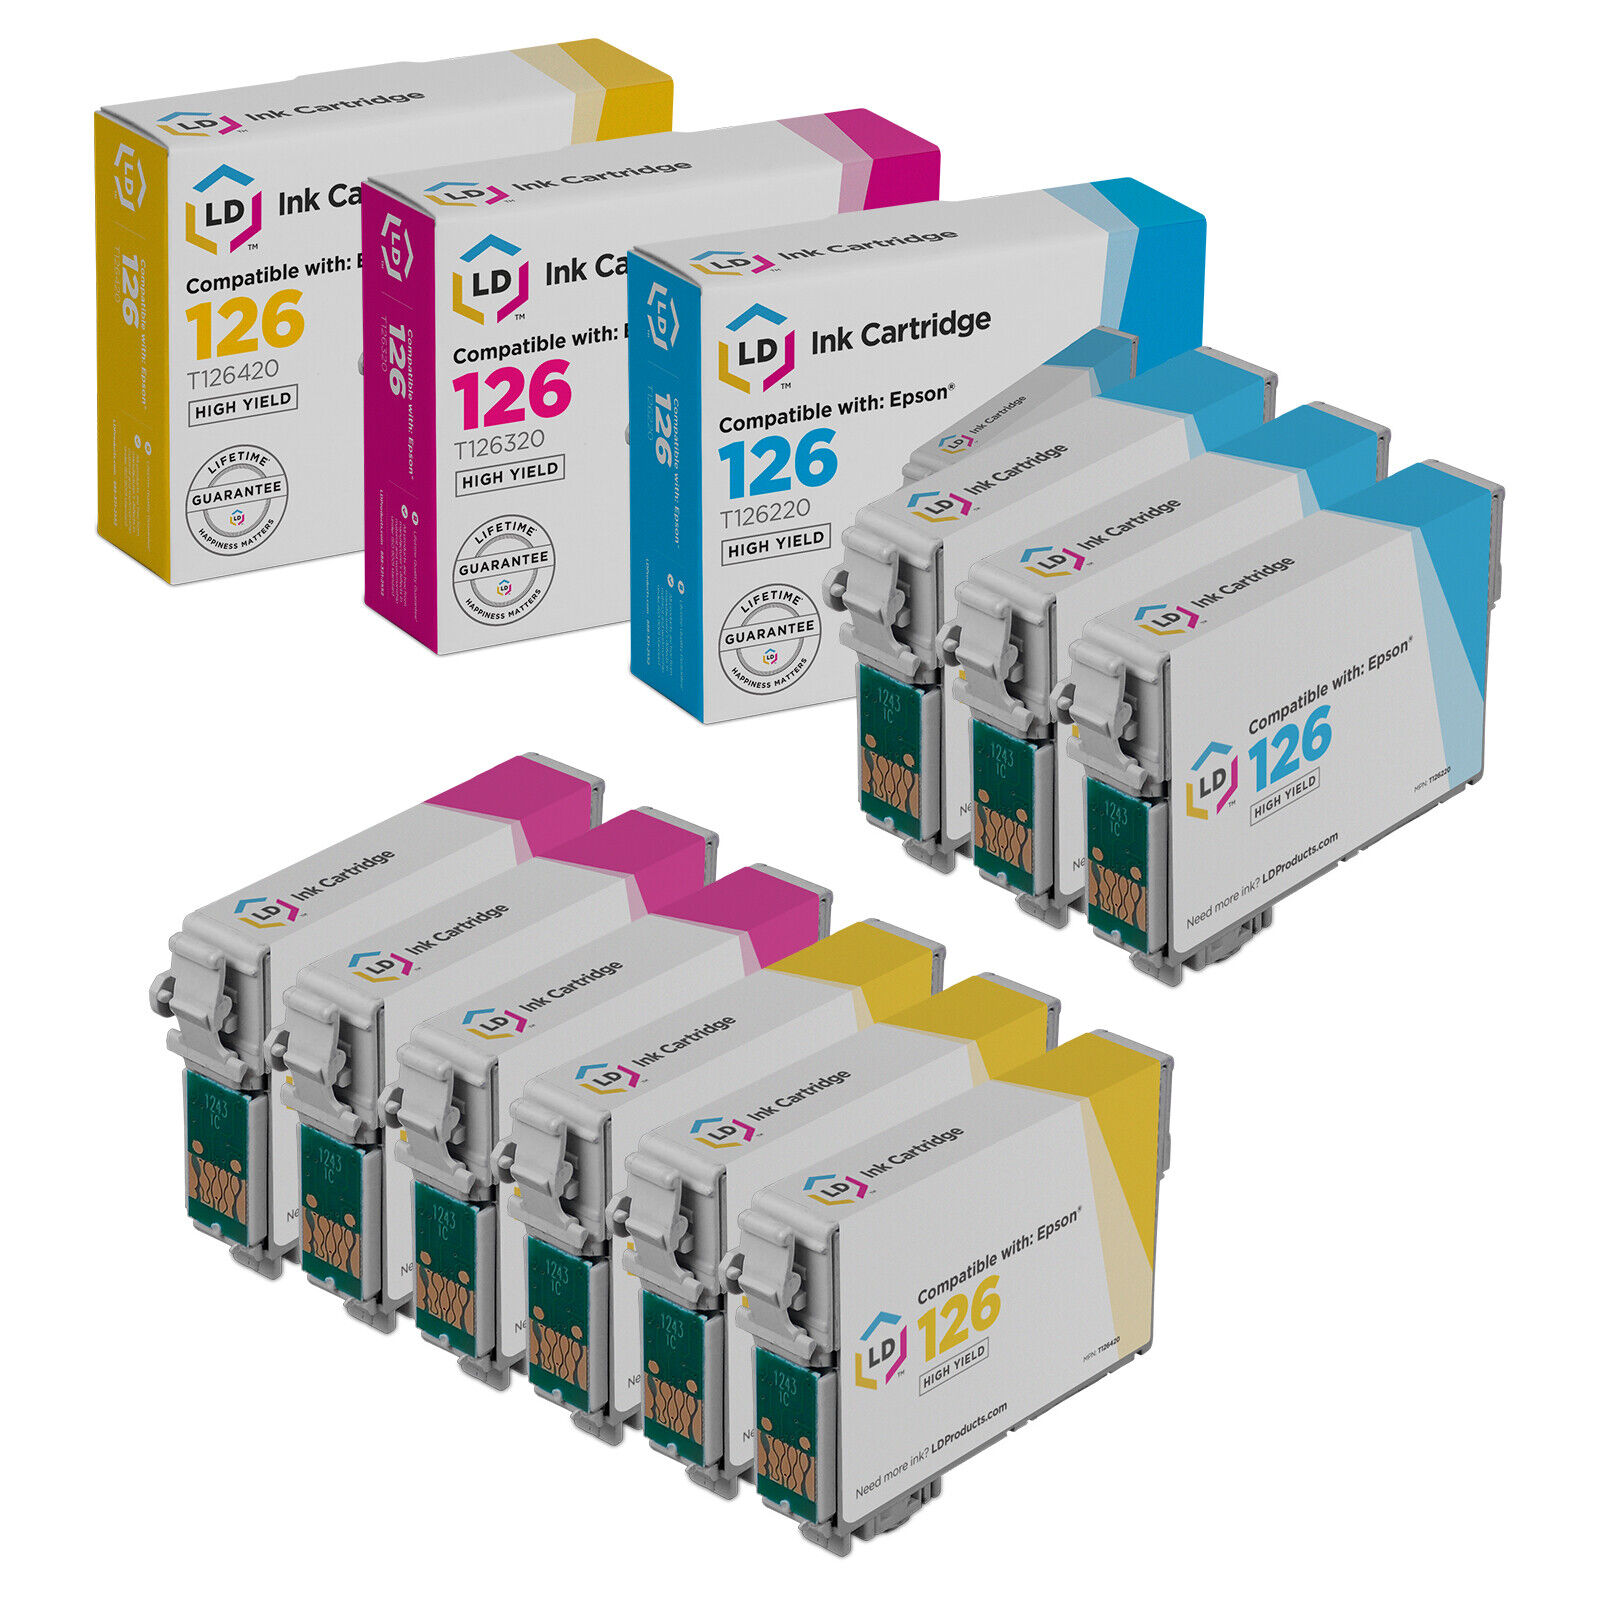 LD Products 9PK Replacement for Epson 126 High Yield Color Ink Cartridge Set